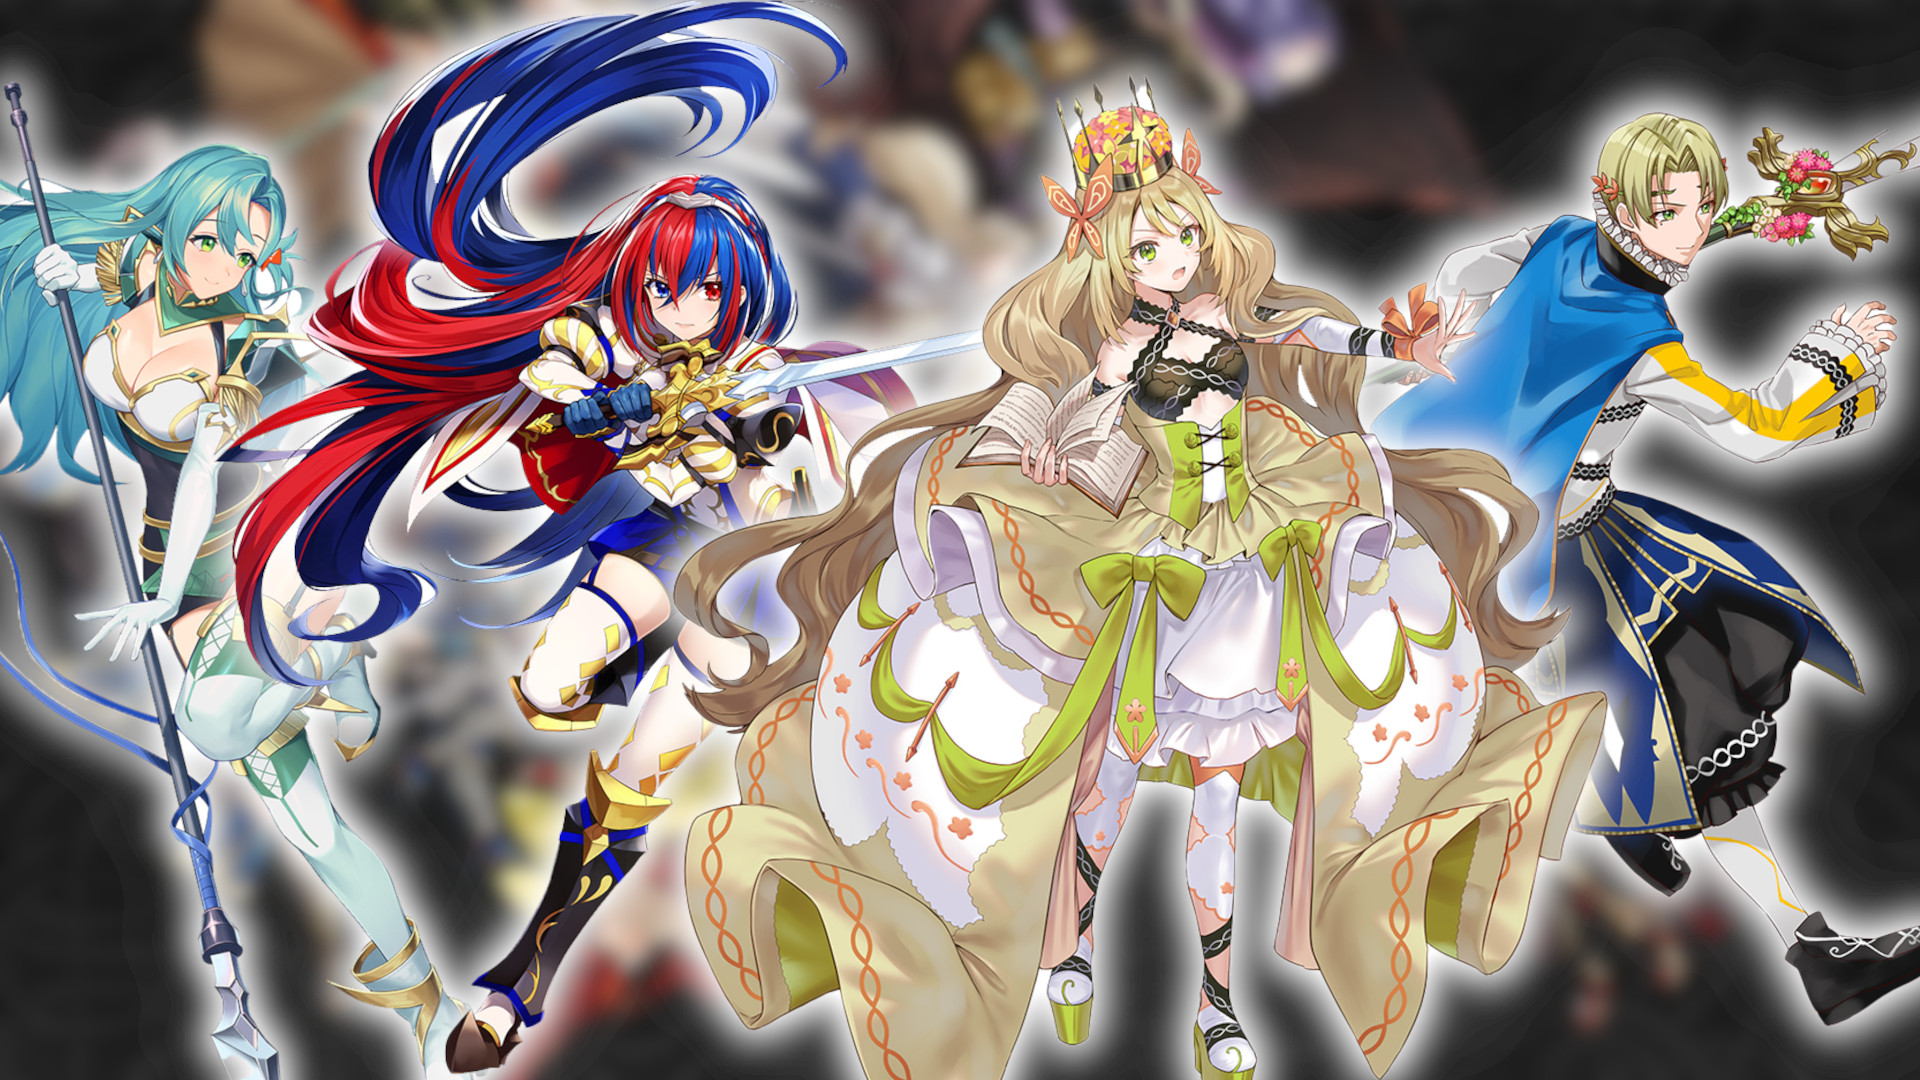 New heroes arrive in Fire Emblem Engage x Fire Emblem Heroes collab